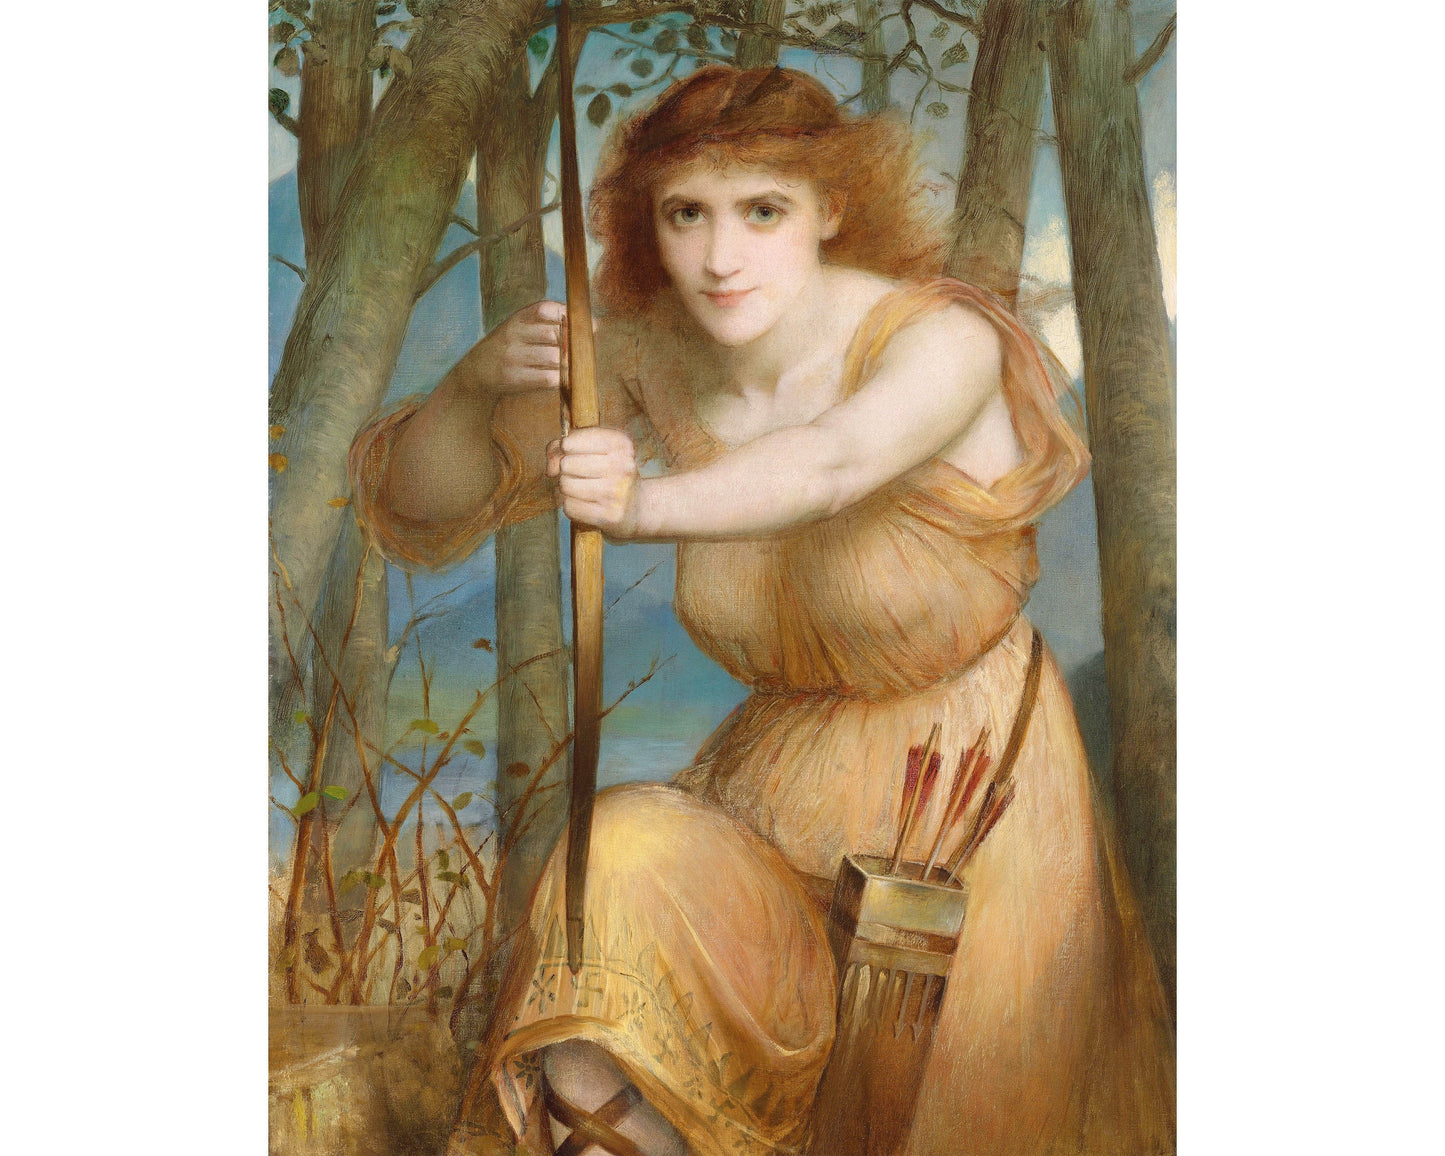 Vintage woman archer fine art print | The Archer | Charles Edward Halle | Bow and arrow | Enchanting huntress wall art | Goddess of the hunt